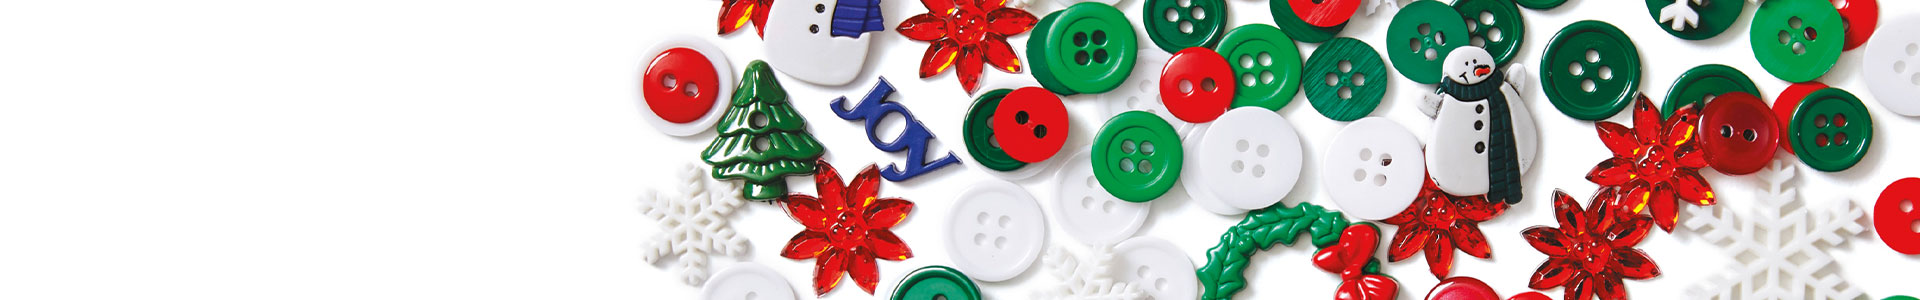 Get in the spirit with our seasonal buttons from Halloween to Christmas & more.